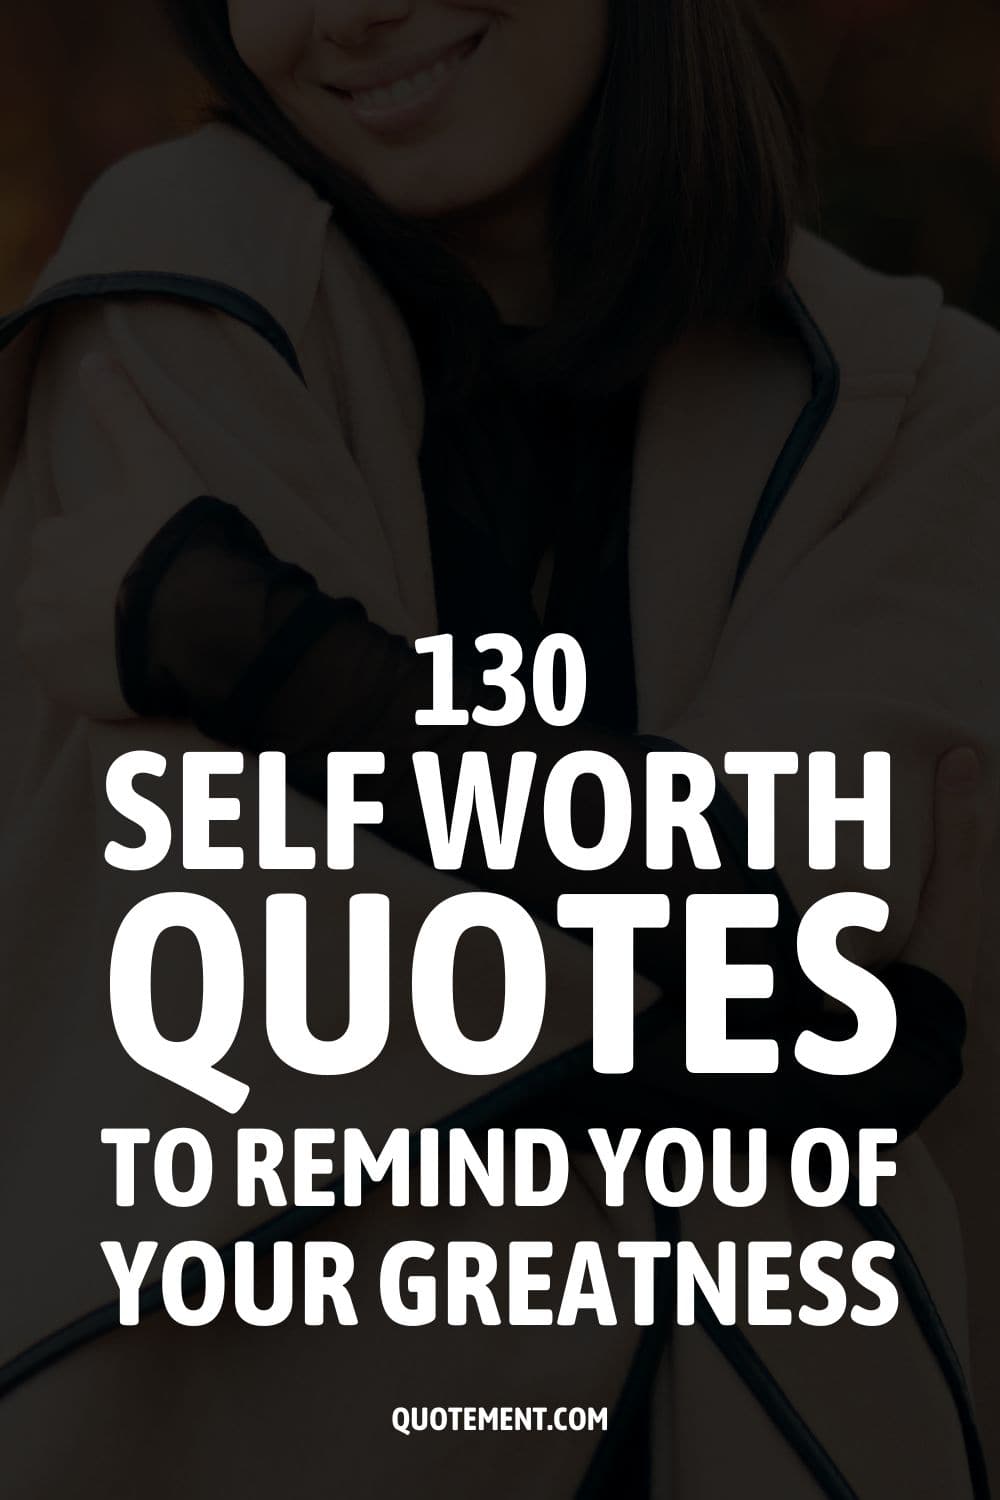 130 Self Worth Quotes To Remind You Of Your Greatness